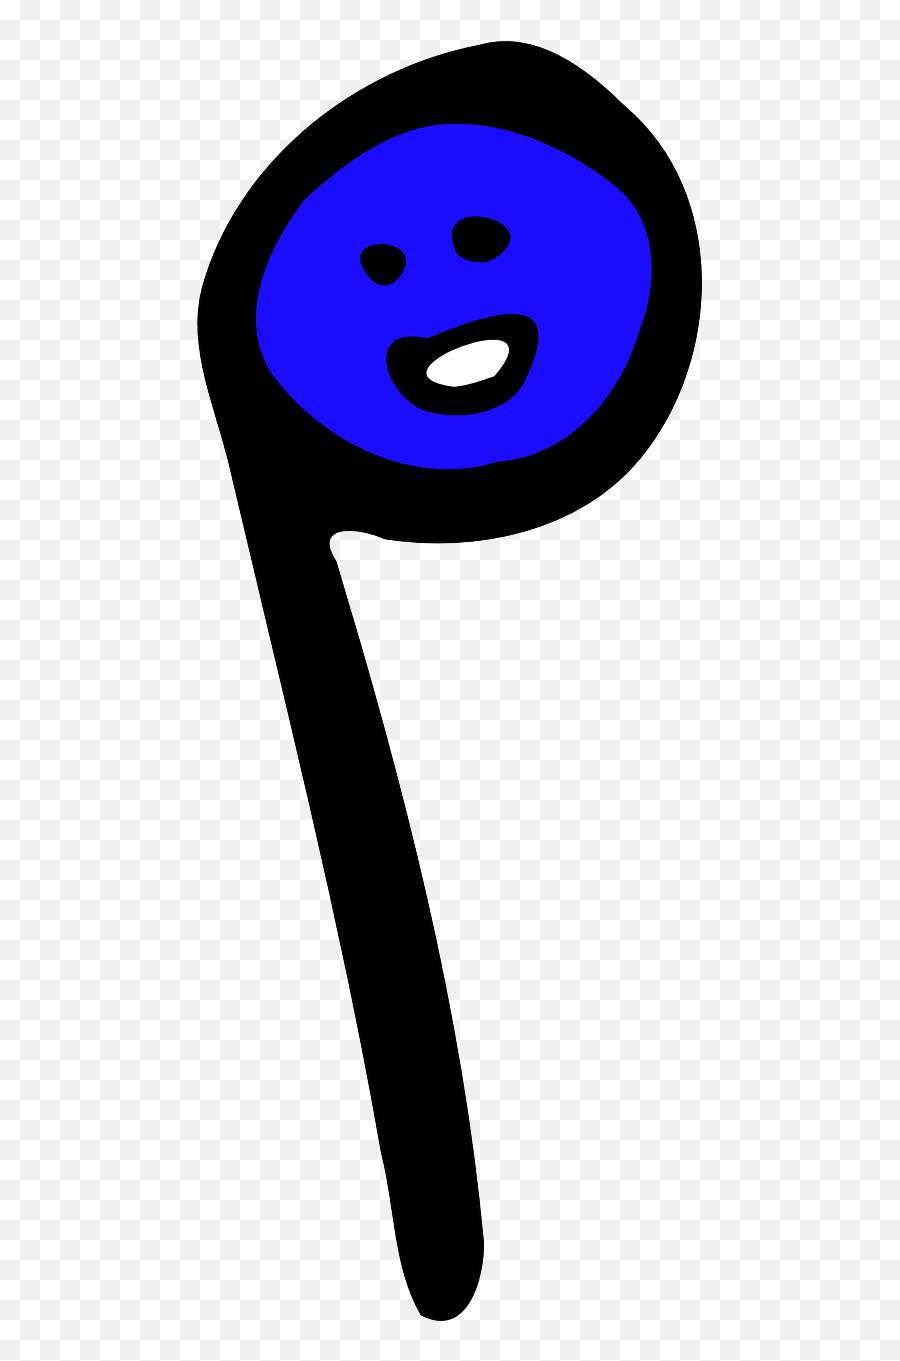 Blue Music Note Melody Free Vector Graphics - Clip Art Emoji,Music Note Emoticon